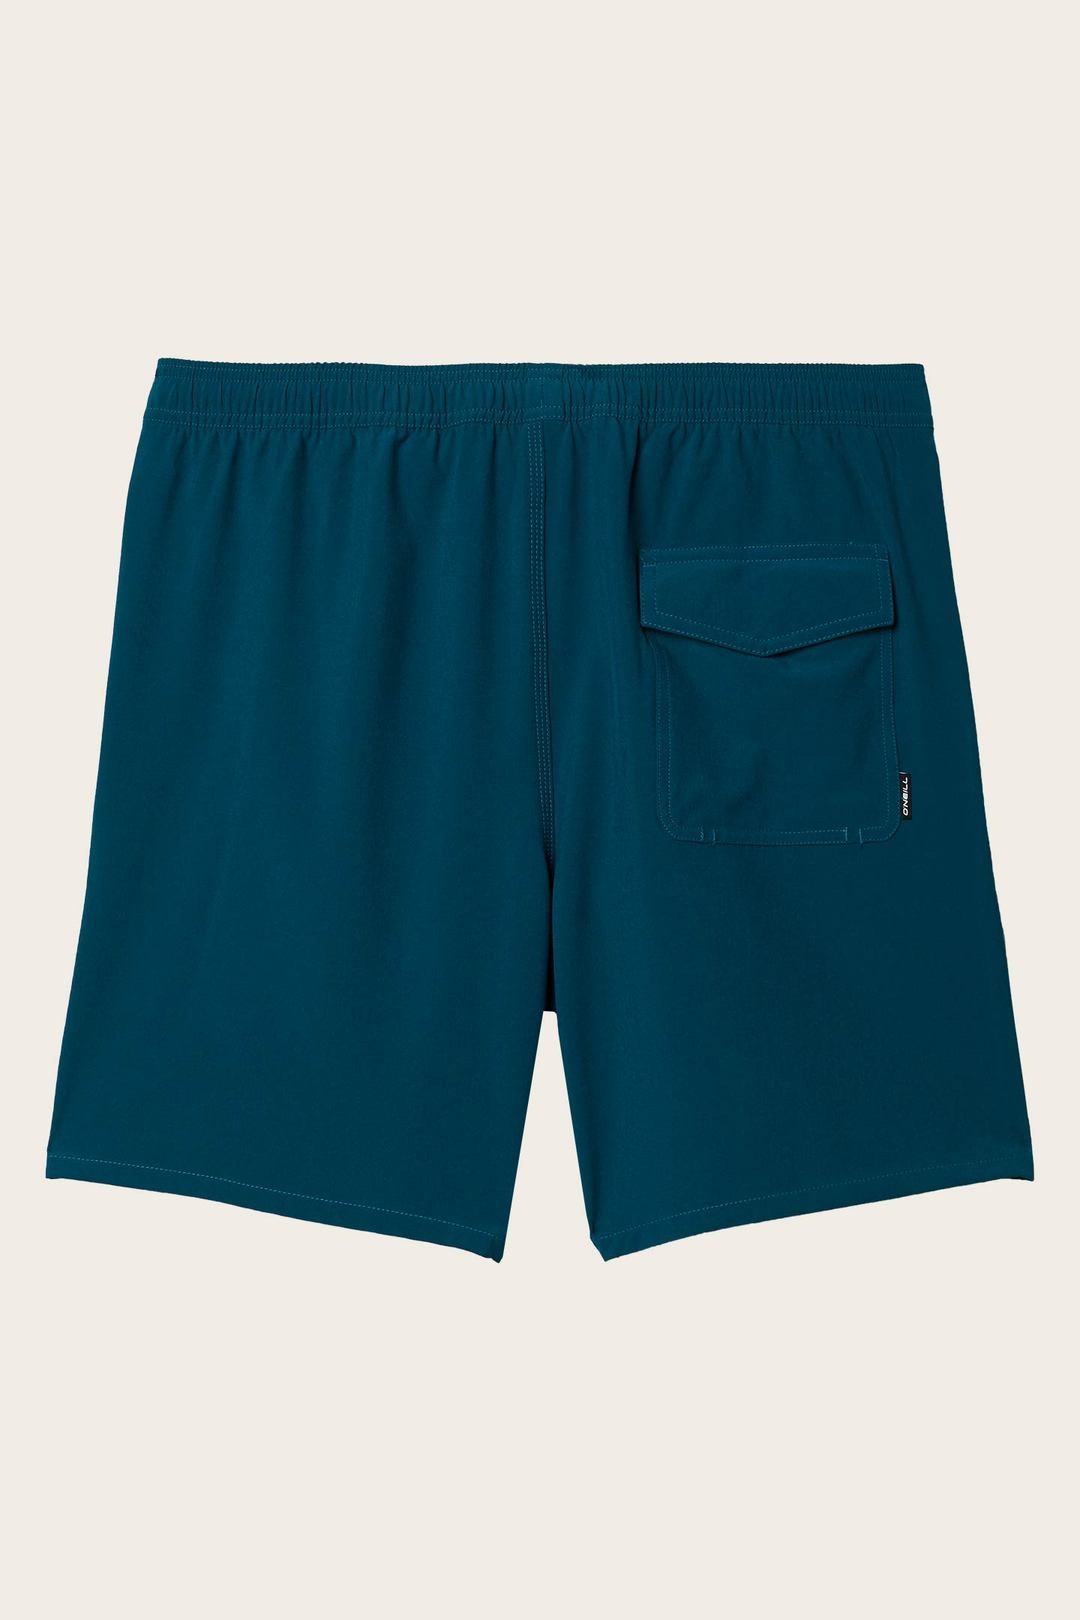 O'Neill Solid 17" Volley Boardshorts